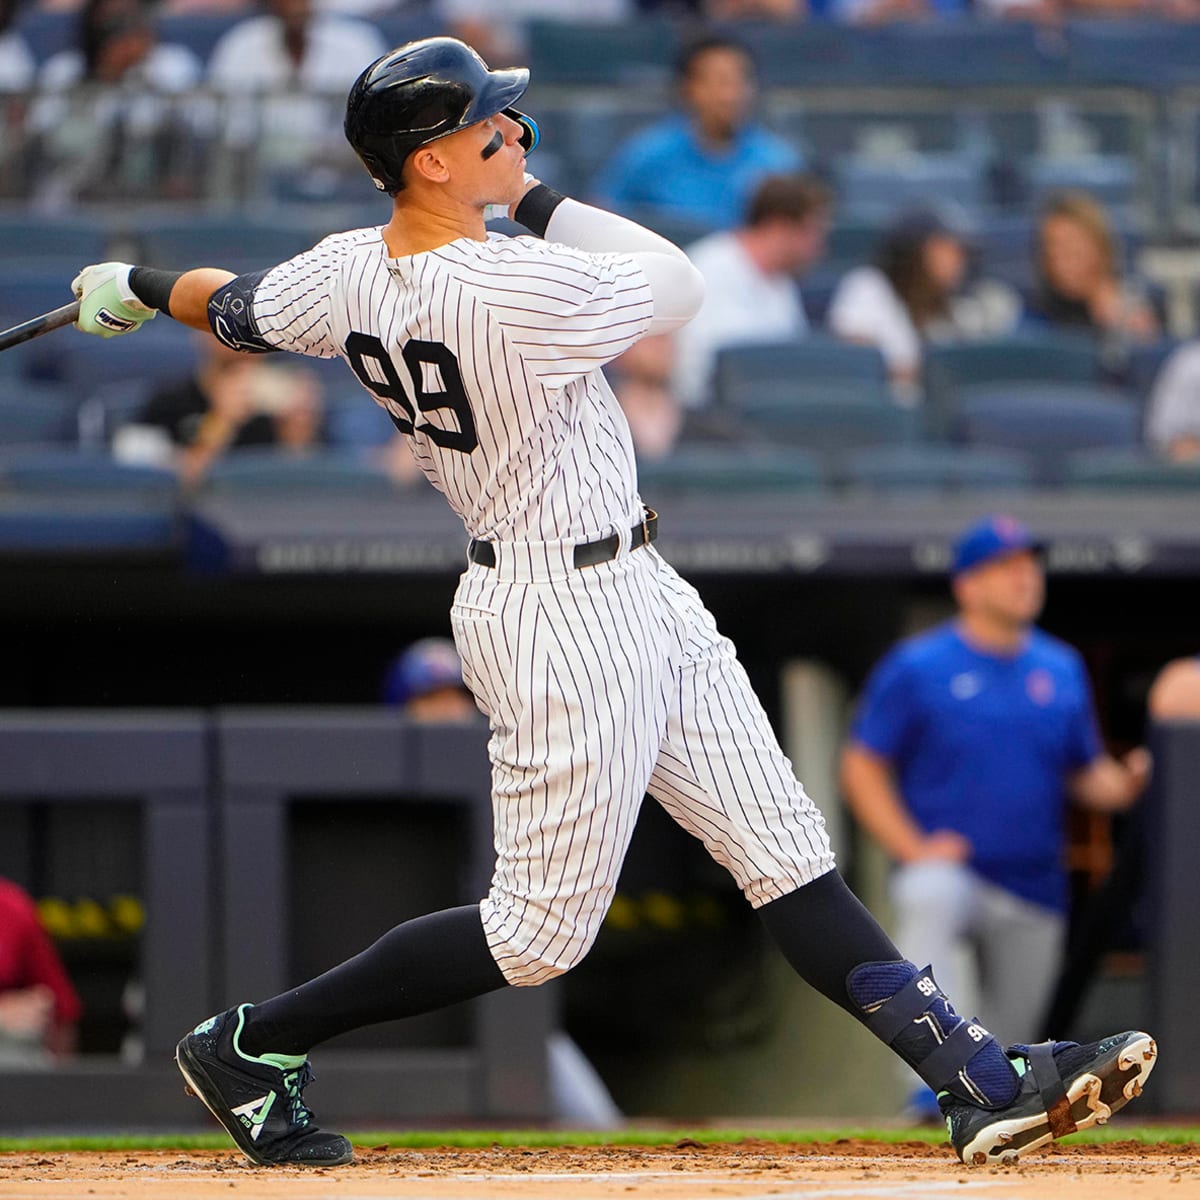 Yankees' Aaron Judge and the importance of the yankees mlb jersey